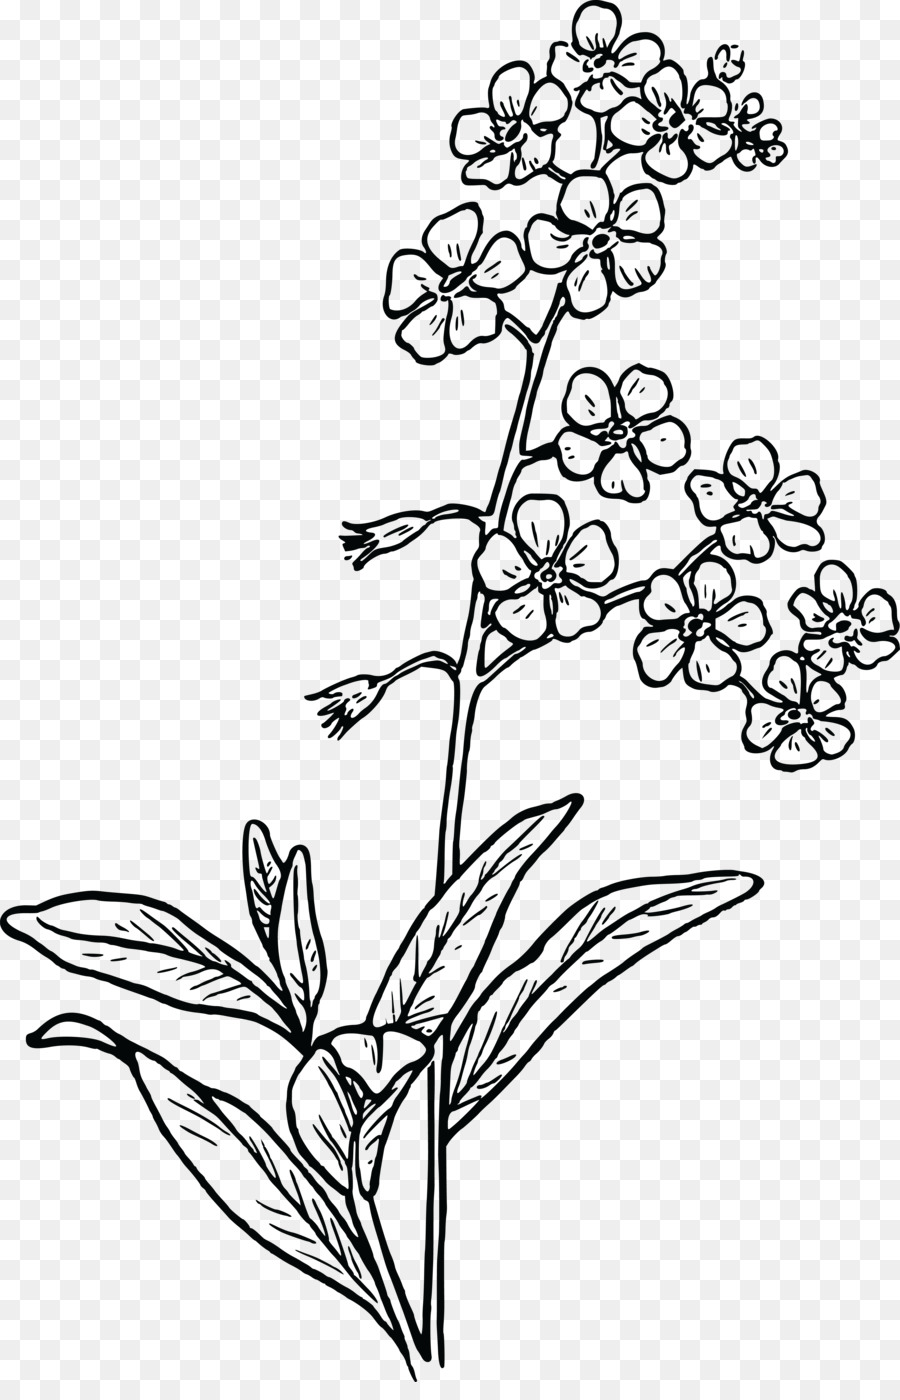 Black And White Flower Clipart Drawing Sketch Illustration